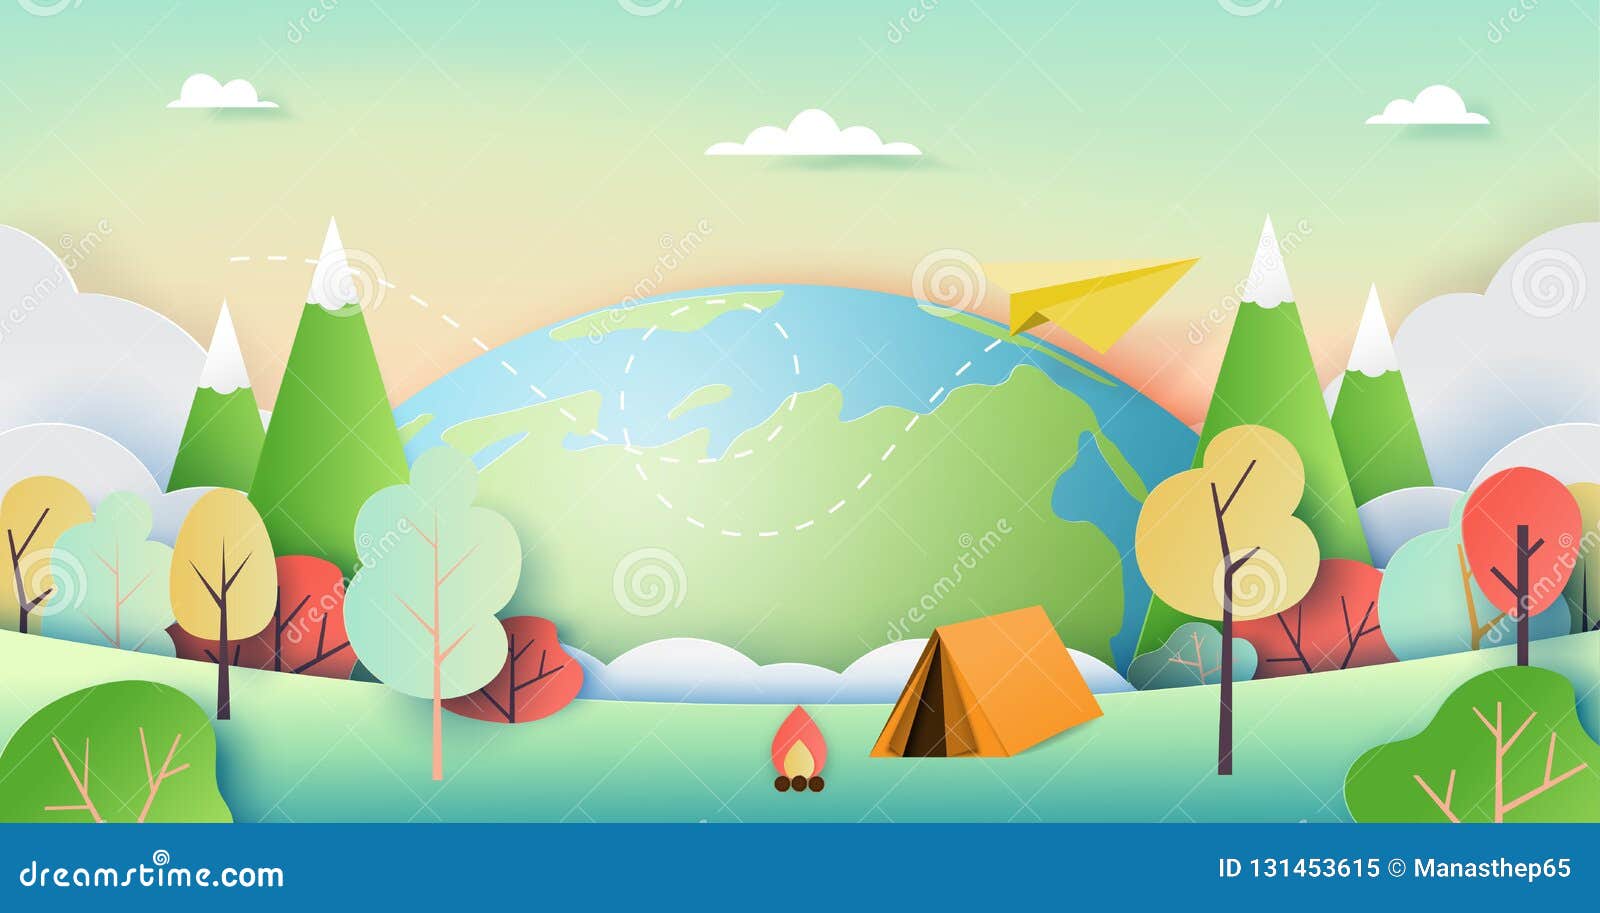 Summer Camp and Adventure in Nature Landscape Background of Holidays and  Vacation  Art Style. Stock Vector - Illustration of hiking,  origami: 131453615